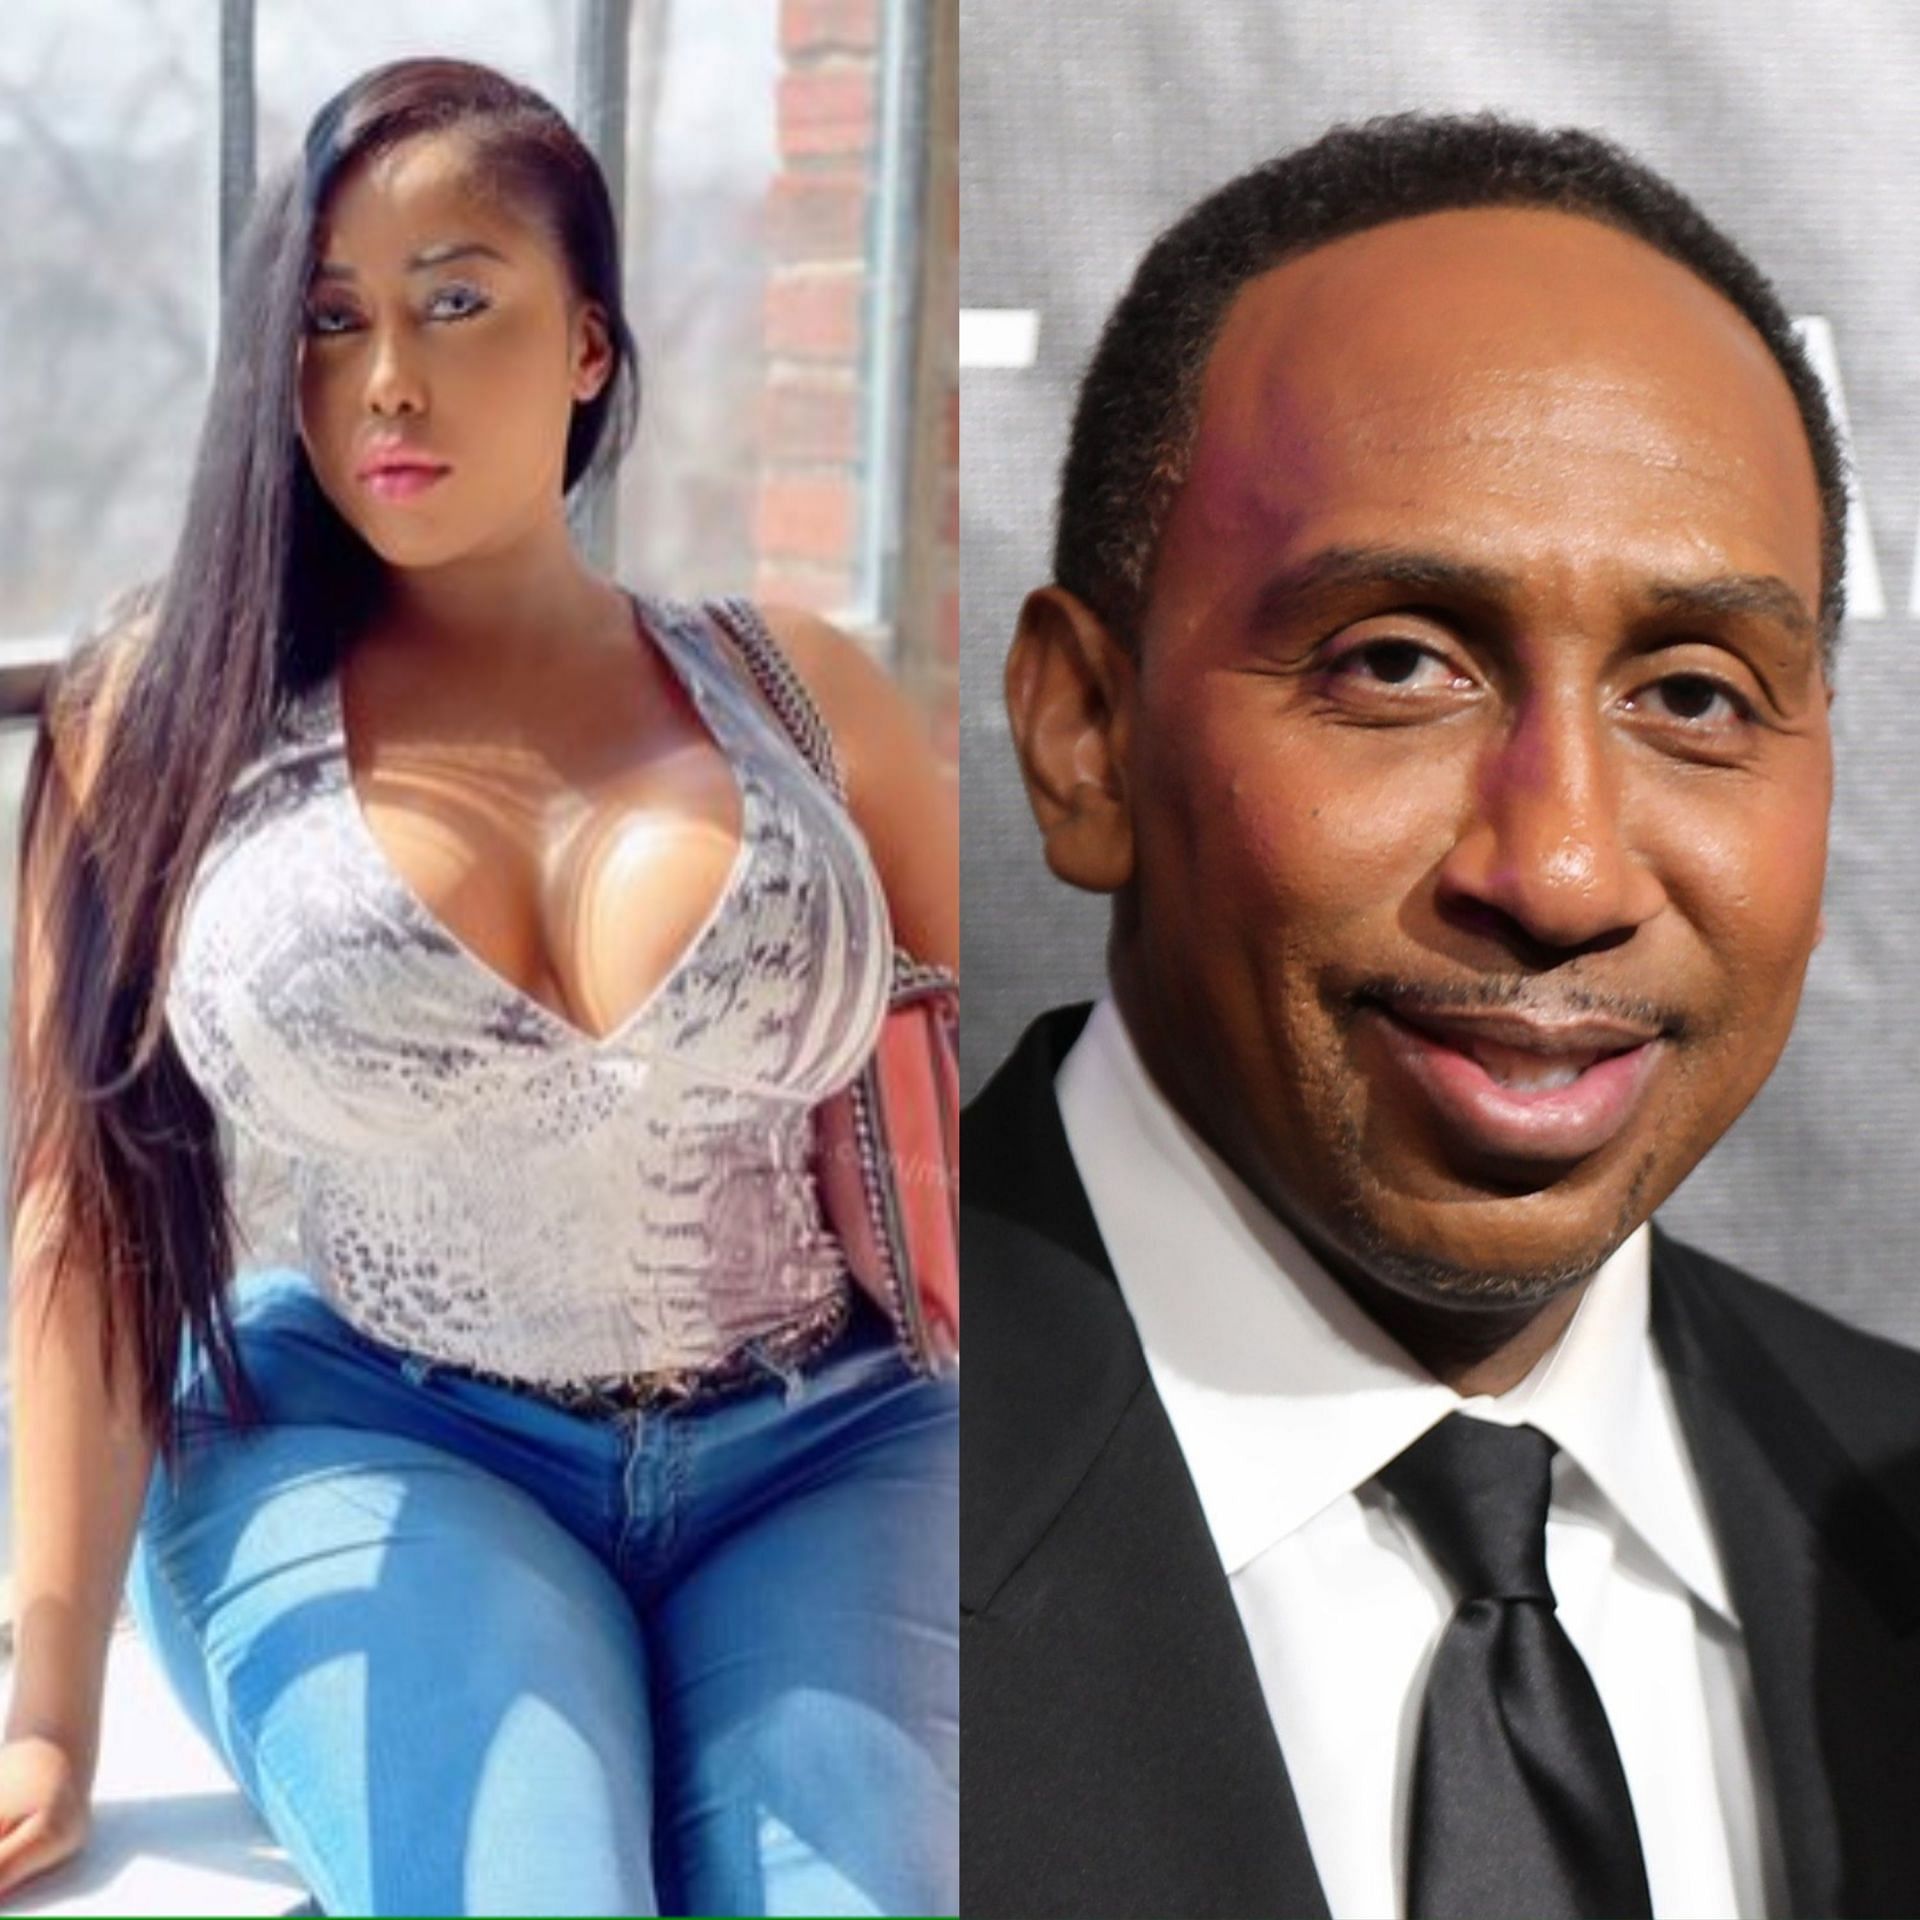 Moriah Mills has entered my live YouTube chat” – Stephen A. Smith catches adult actress posting about Zion Williamson again